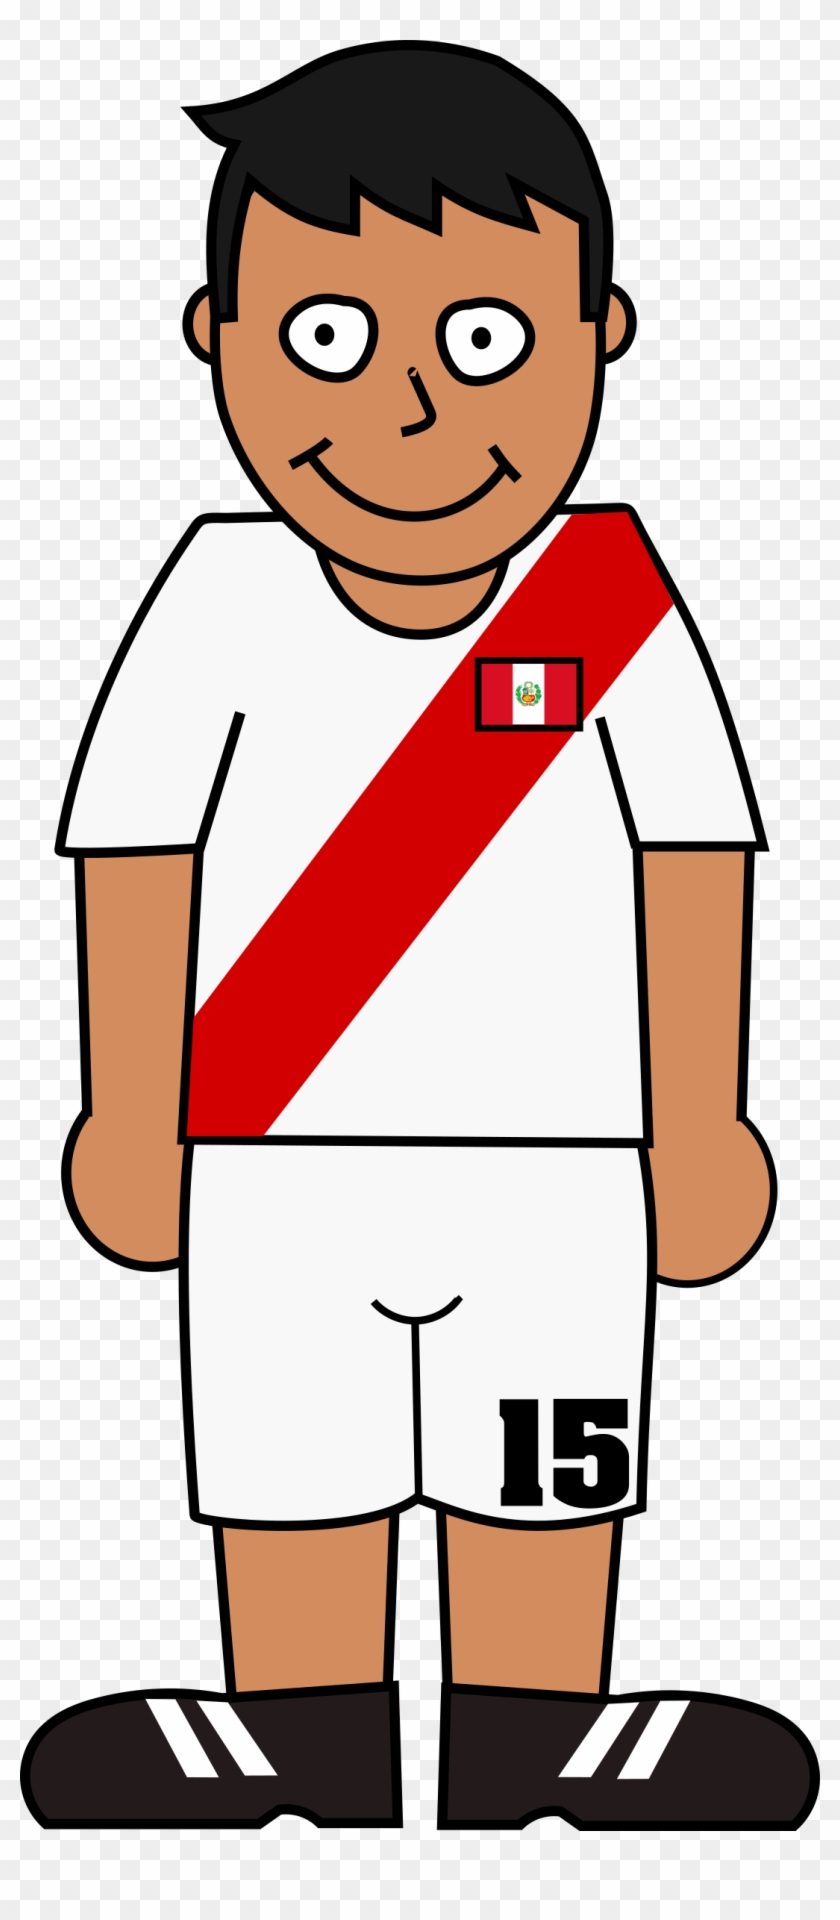 Big Image - World Cup Soccer Player Clipart Png #837472